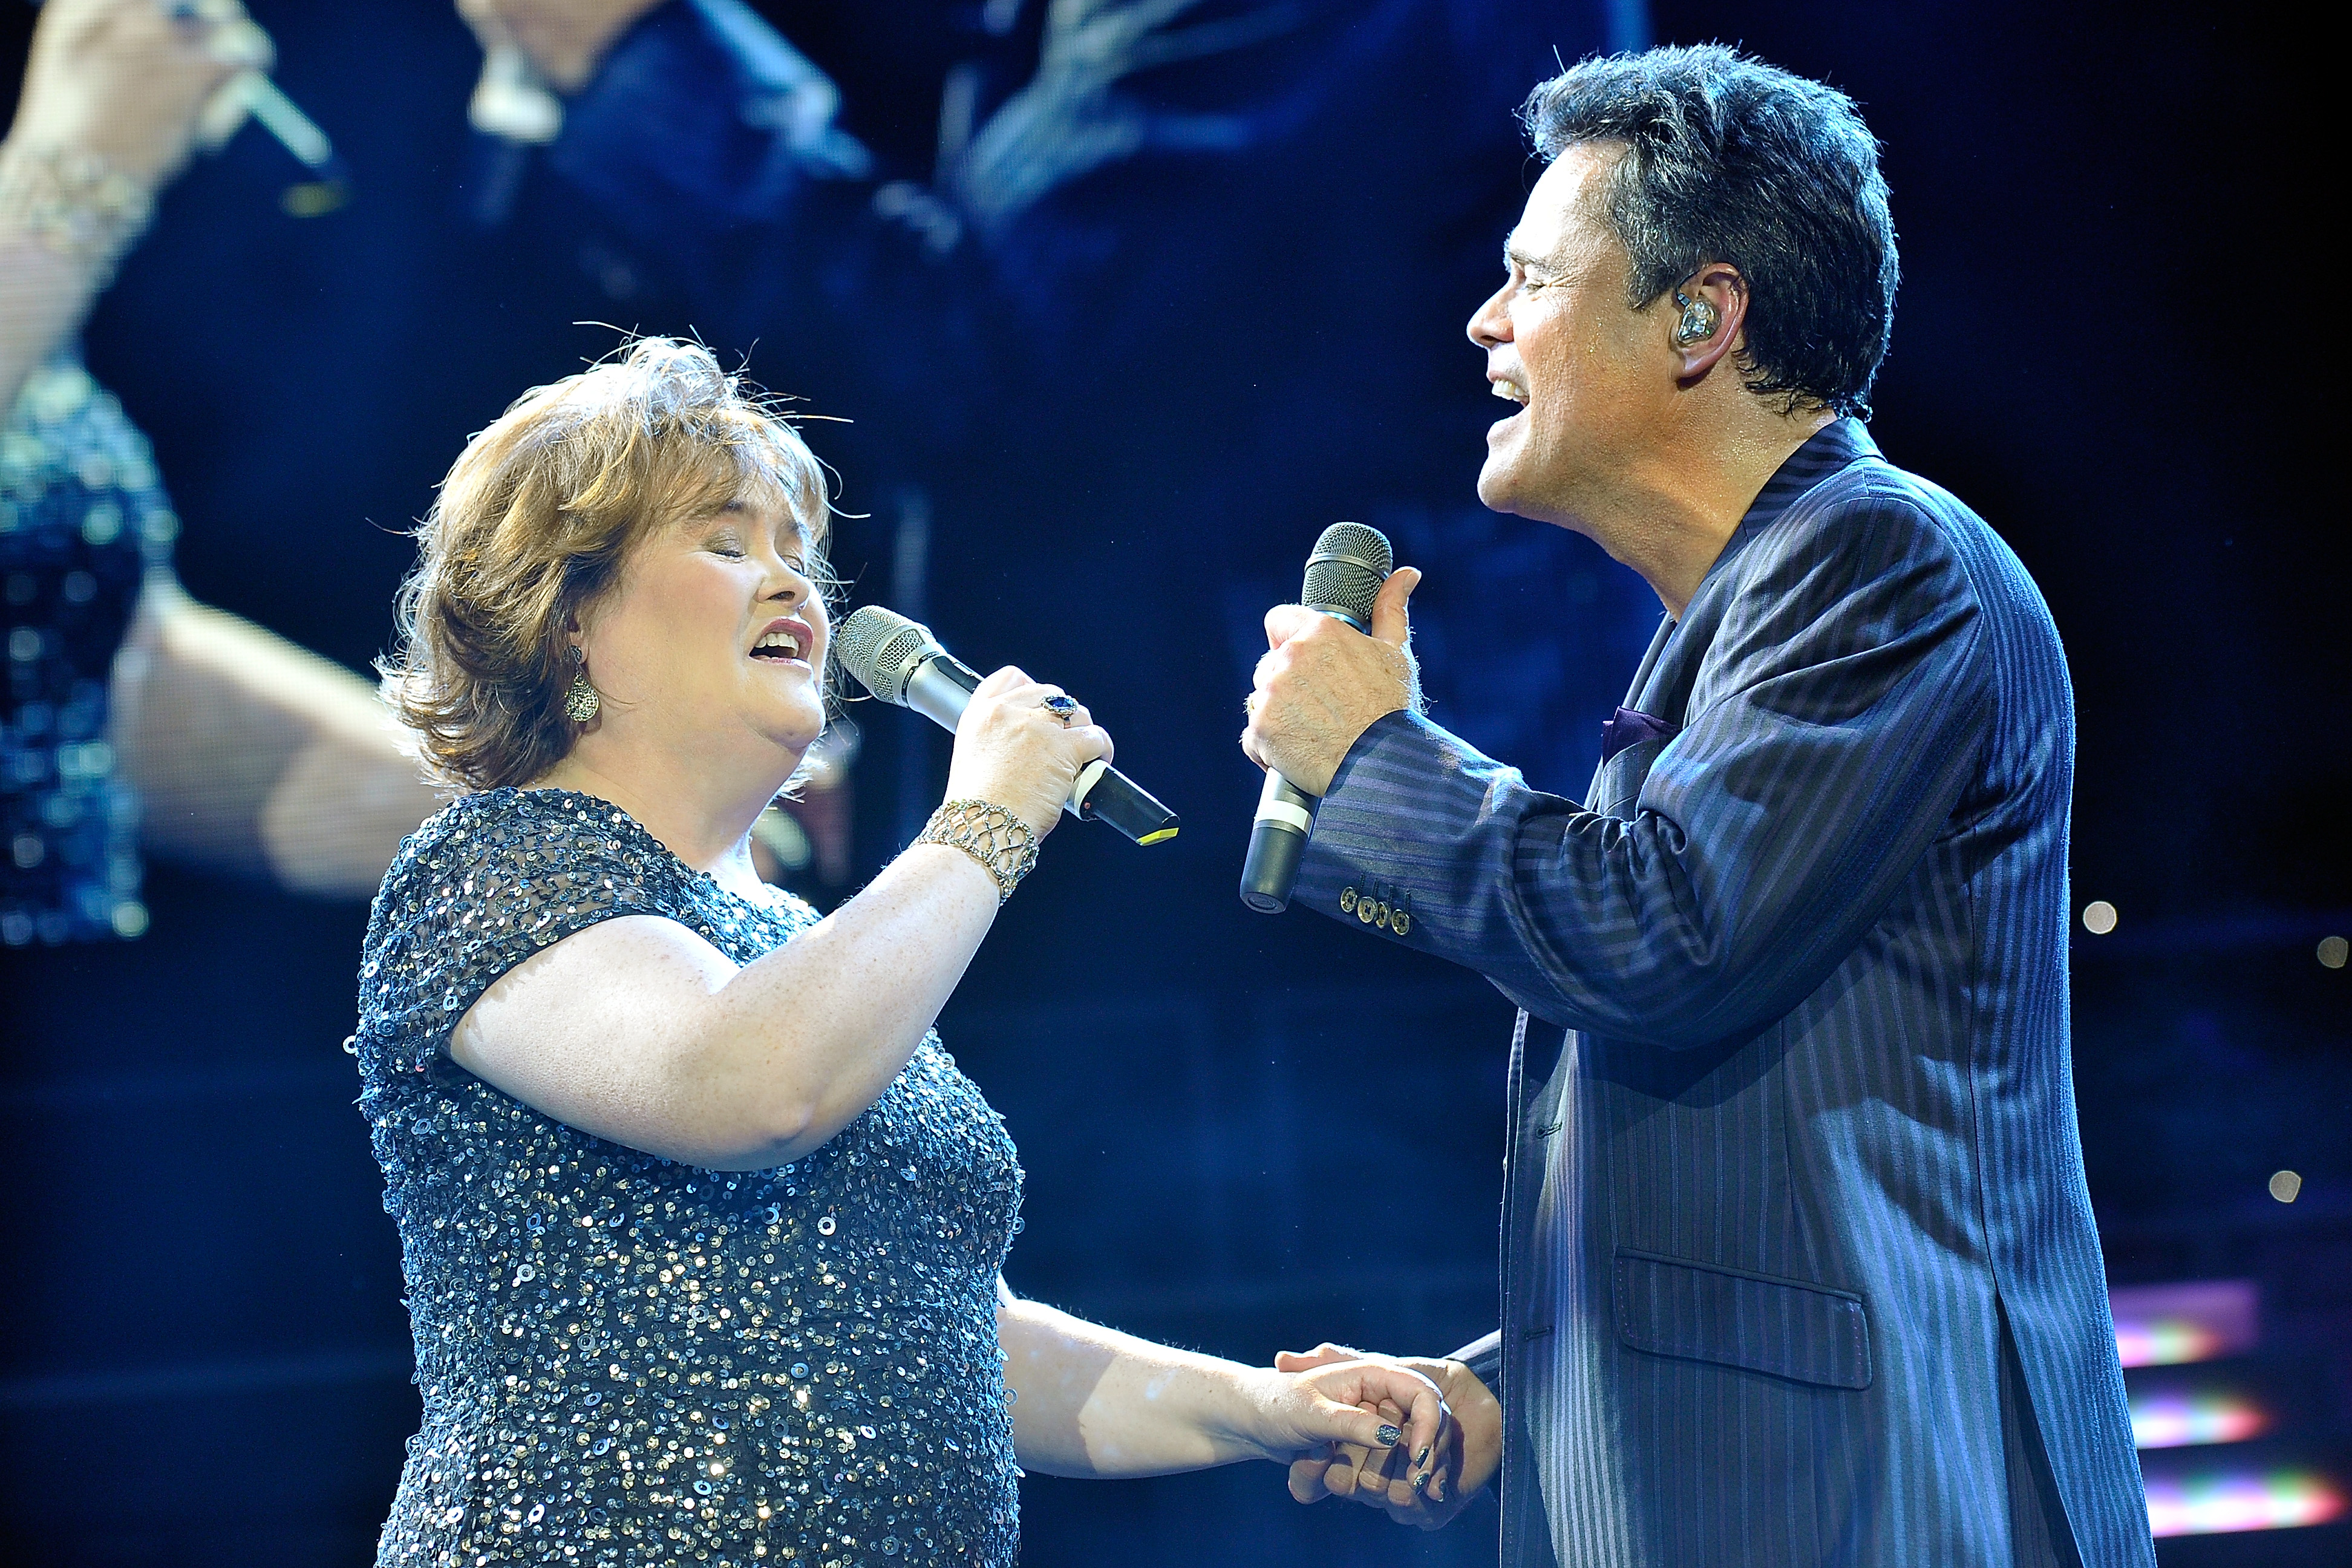 Susan Boyle performs with Donny Osmond during the Donny and Marie Osmond concert on January 20, 2013 in London, England | Source: Getty Images